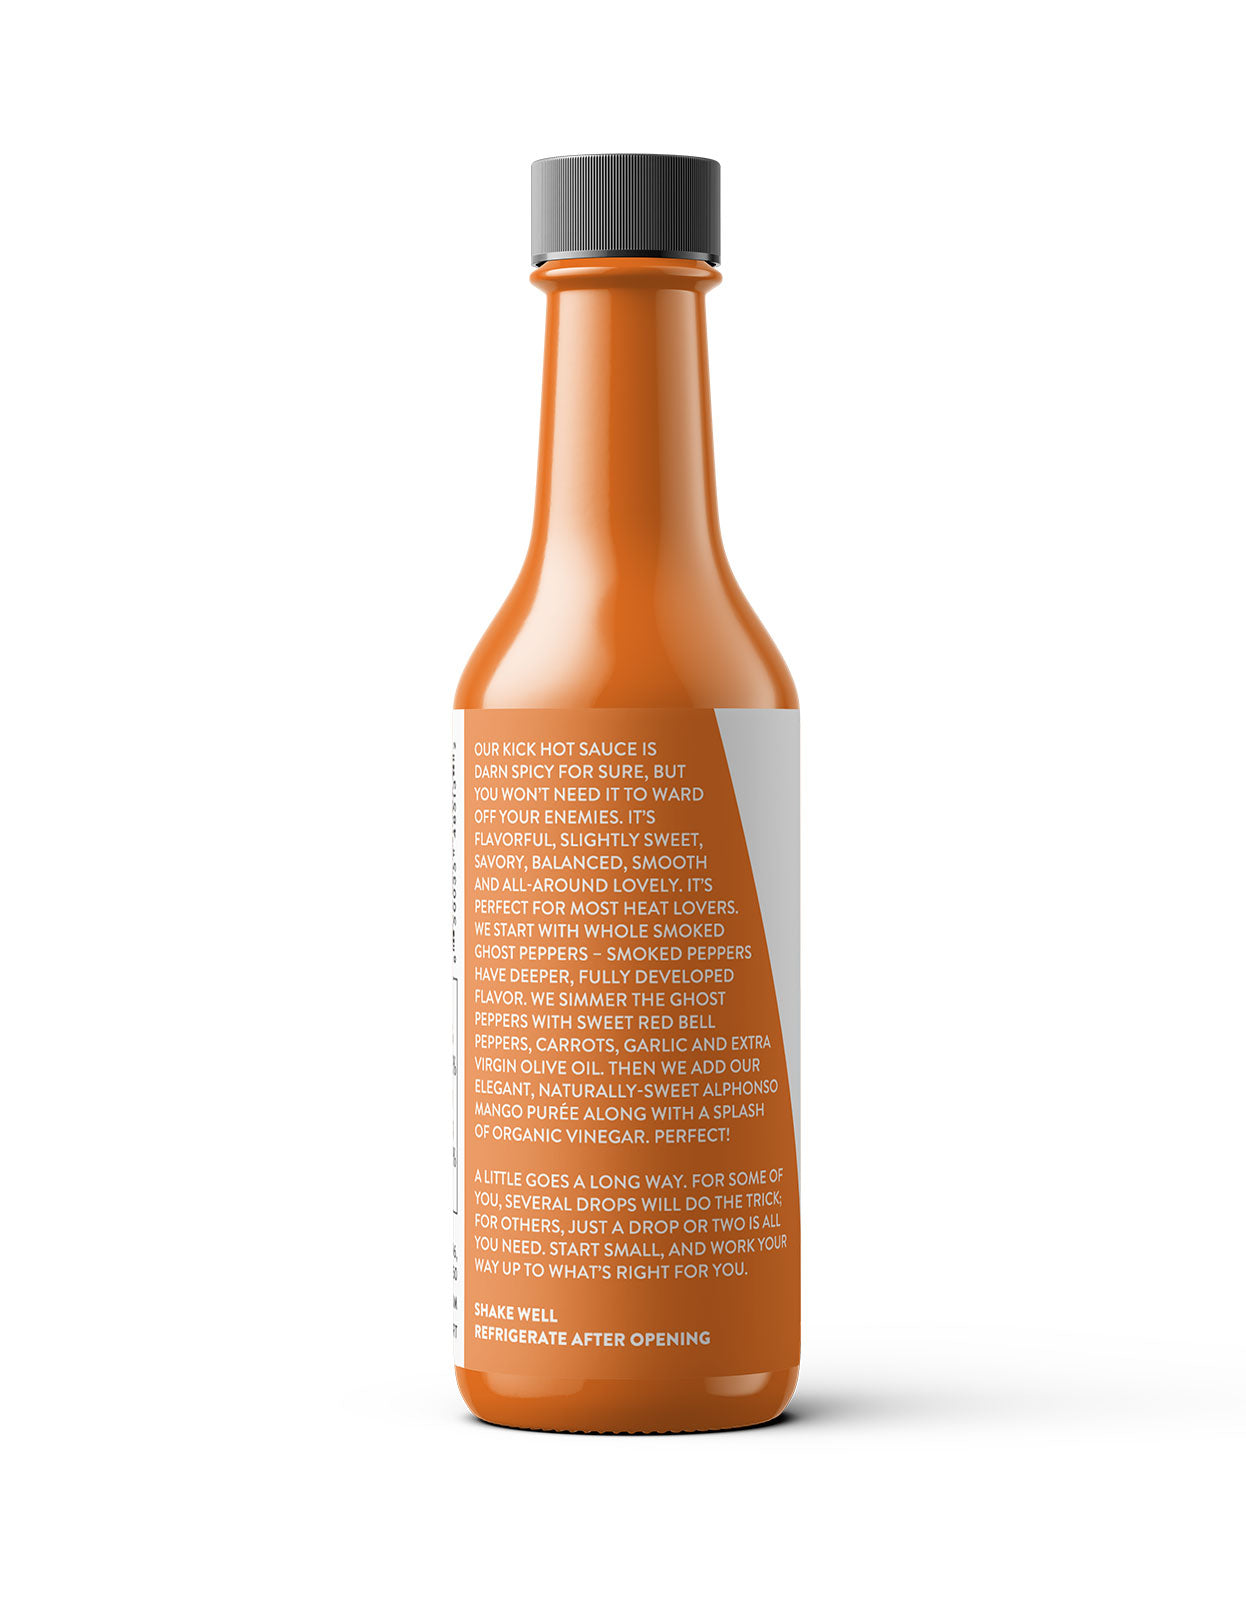 Back label of our Pure Indian Foods KICK Hot Sace, a certified organic Mango hot sauce.  It reads: Our kick hot sauce is darn spicy for sure, but you won't need it to ward off your enemies. it's flavorful, slightly sweet, savory, balanced, smooth, and all-around lovely.